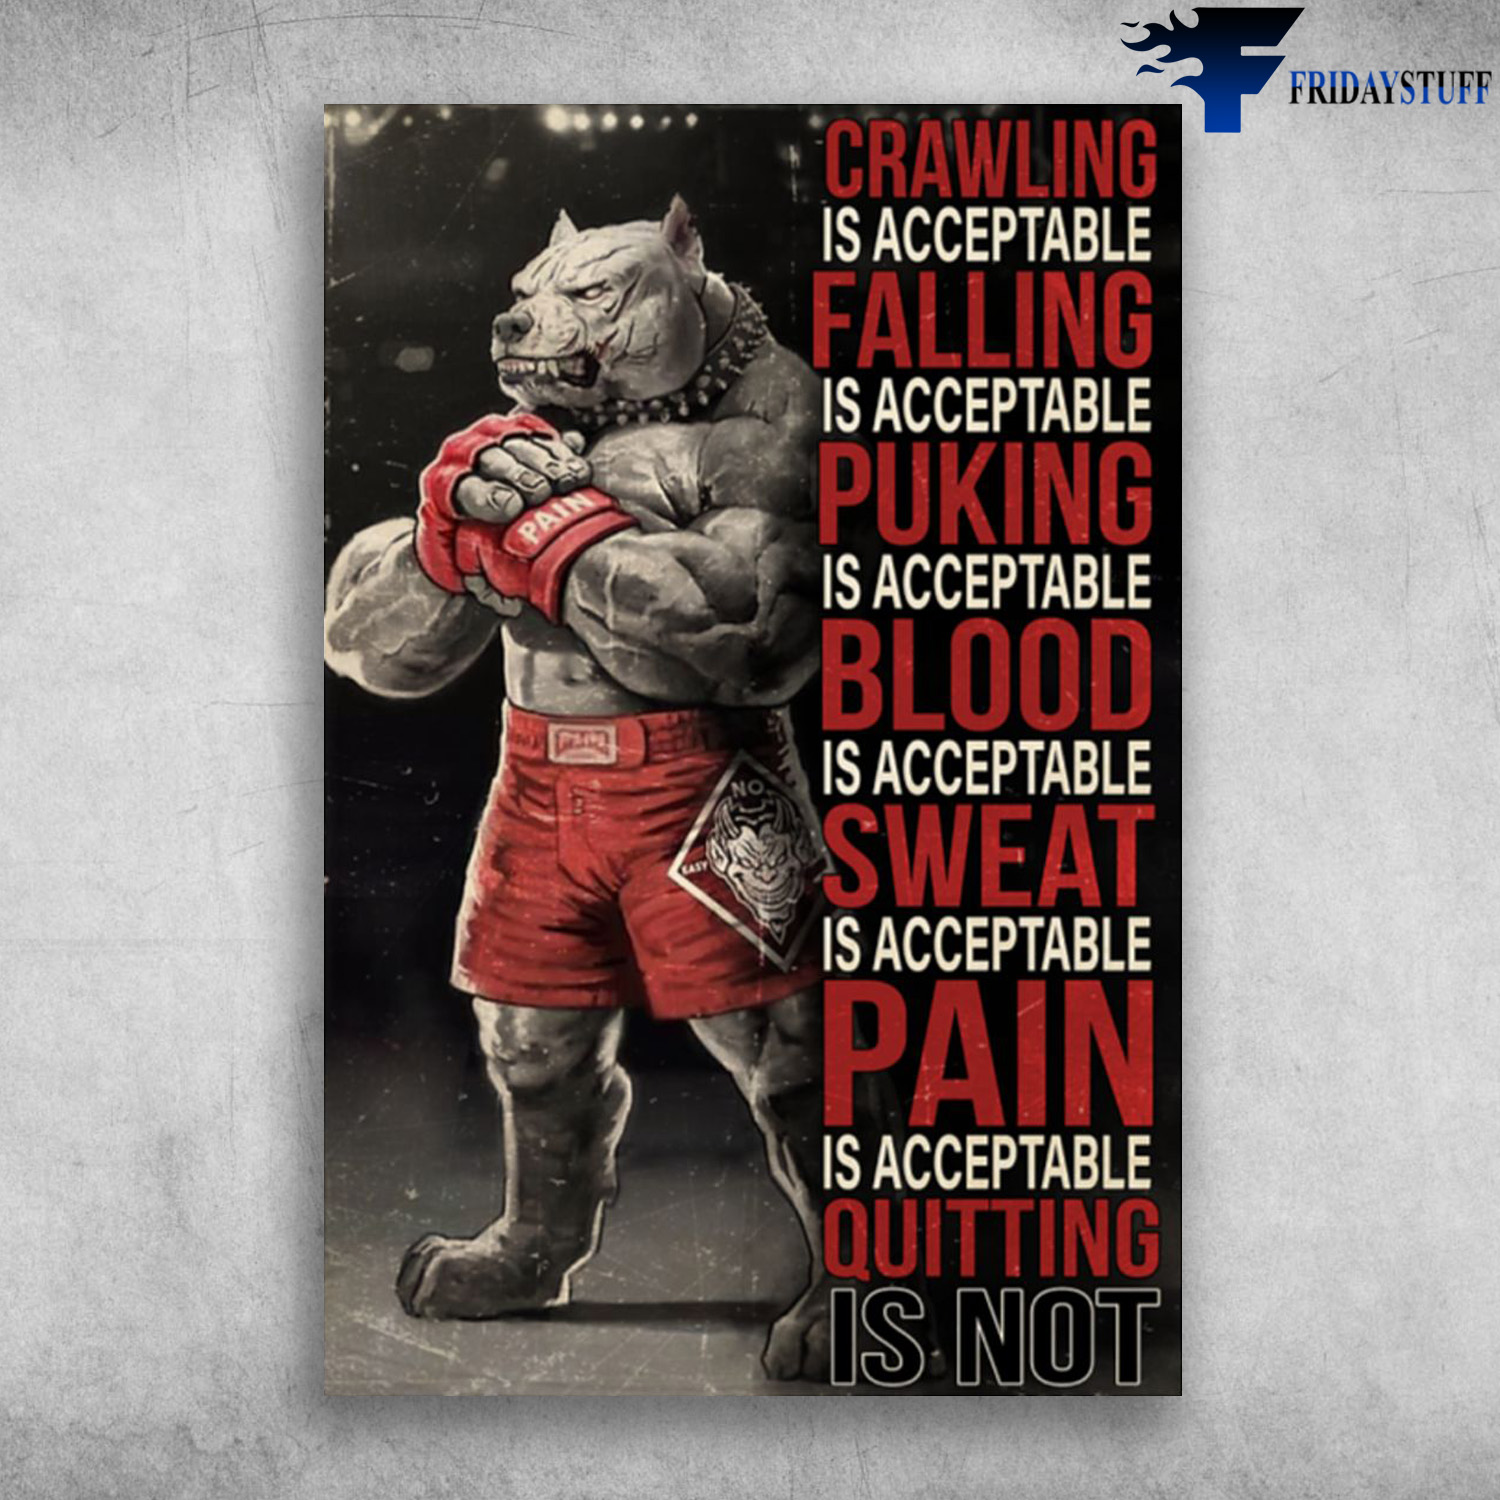 Pitbull Boxing - Crawling Is Acceptable, Falling Is Acceptable, Punking Is Acceptable, Blood Is Acceptable, Sweat Is Acceptable, Pain Is Acceptable, Quitting Is Not